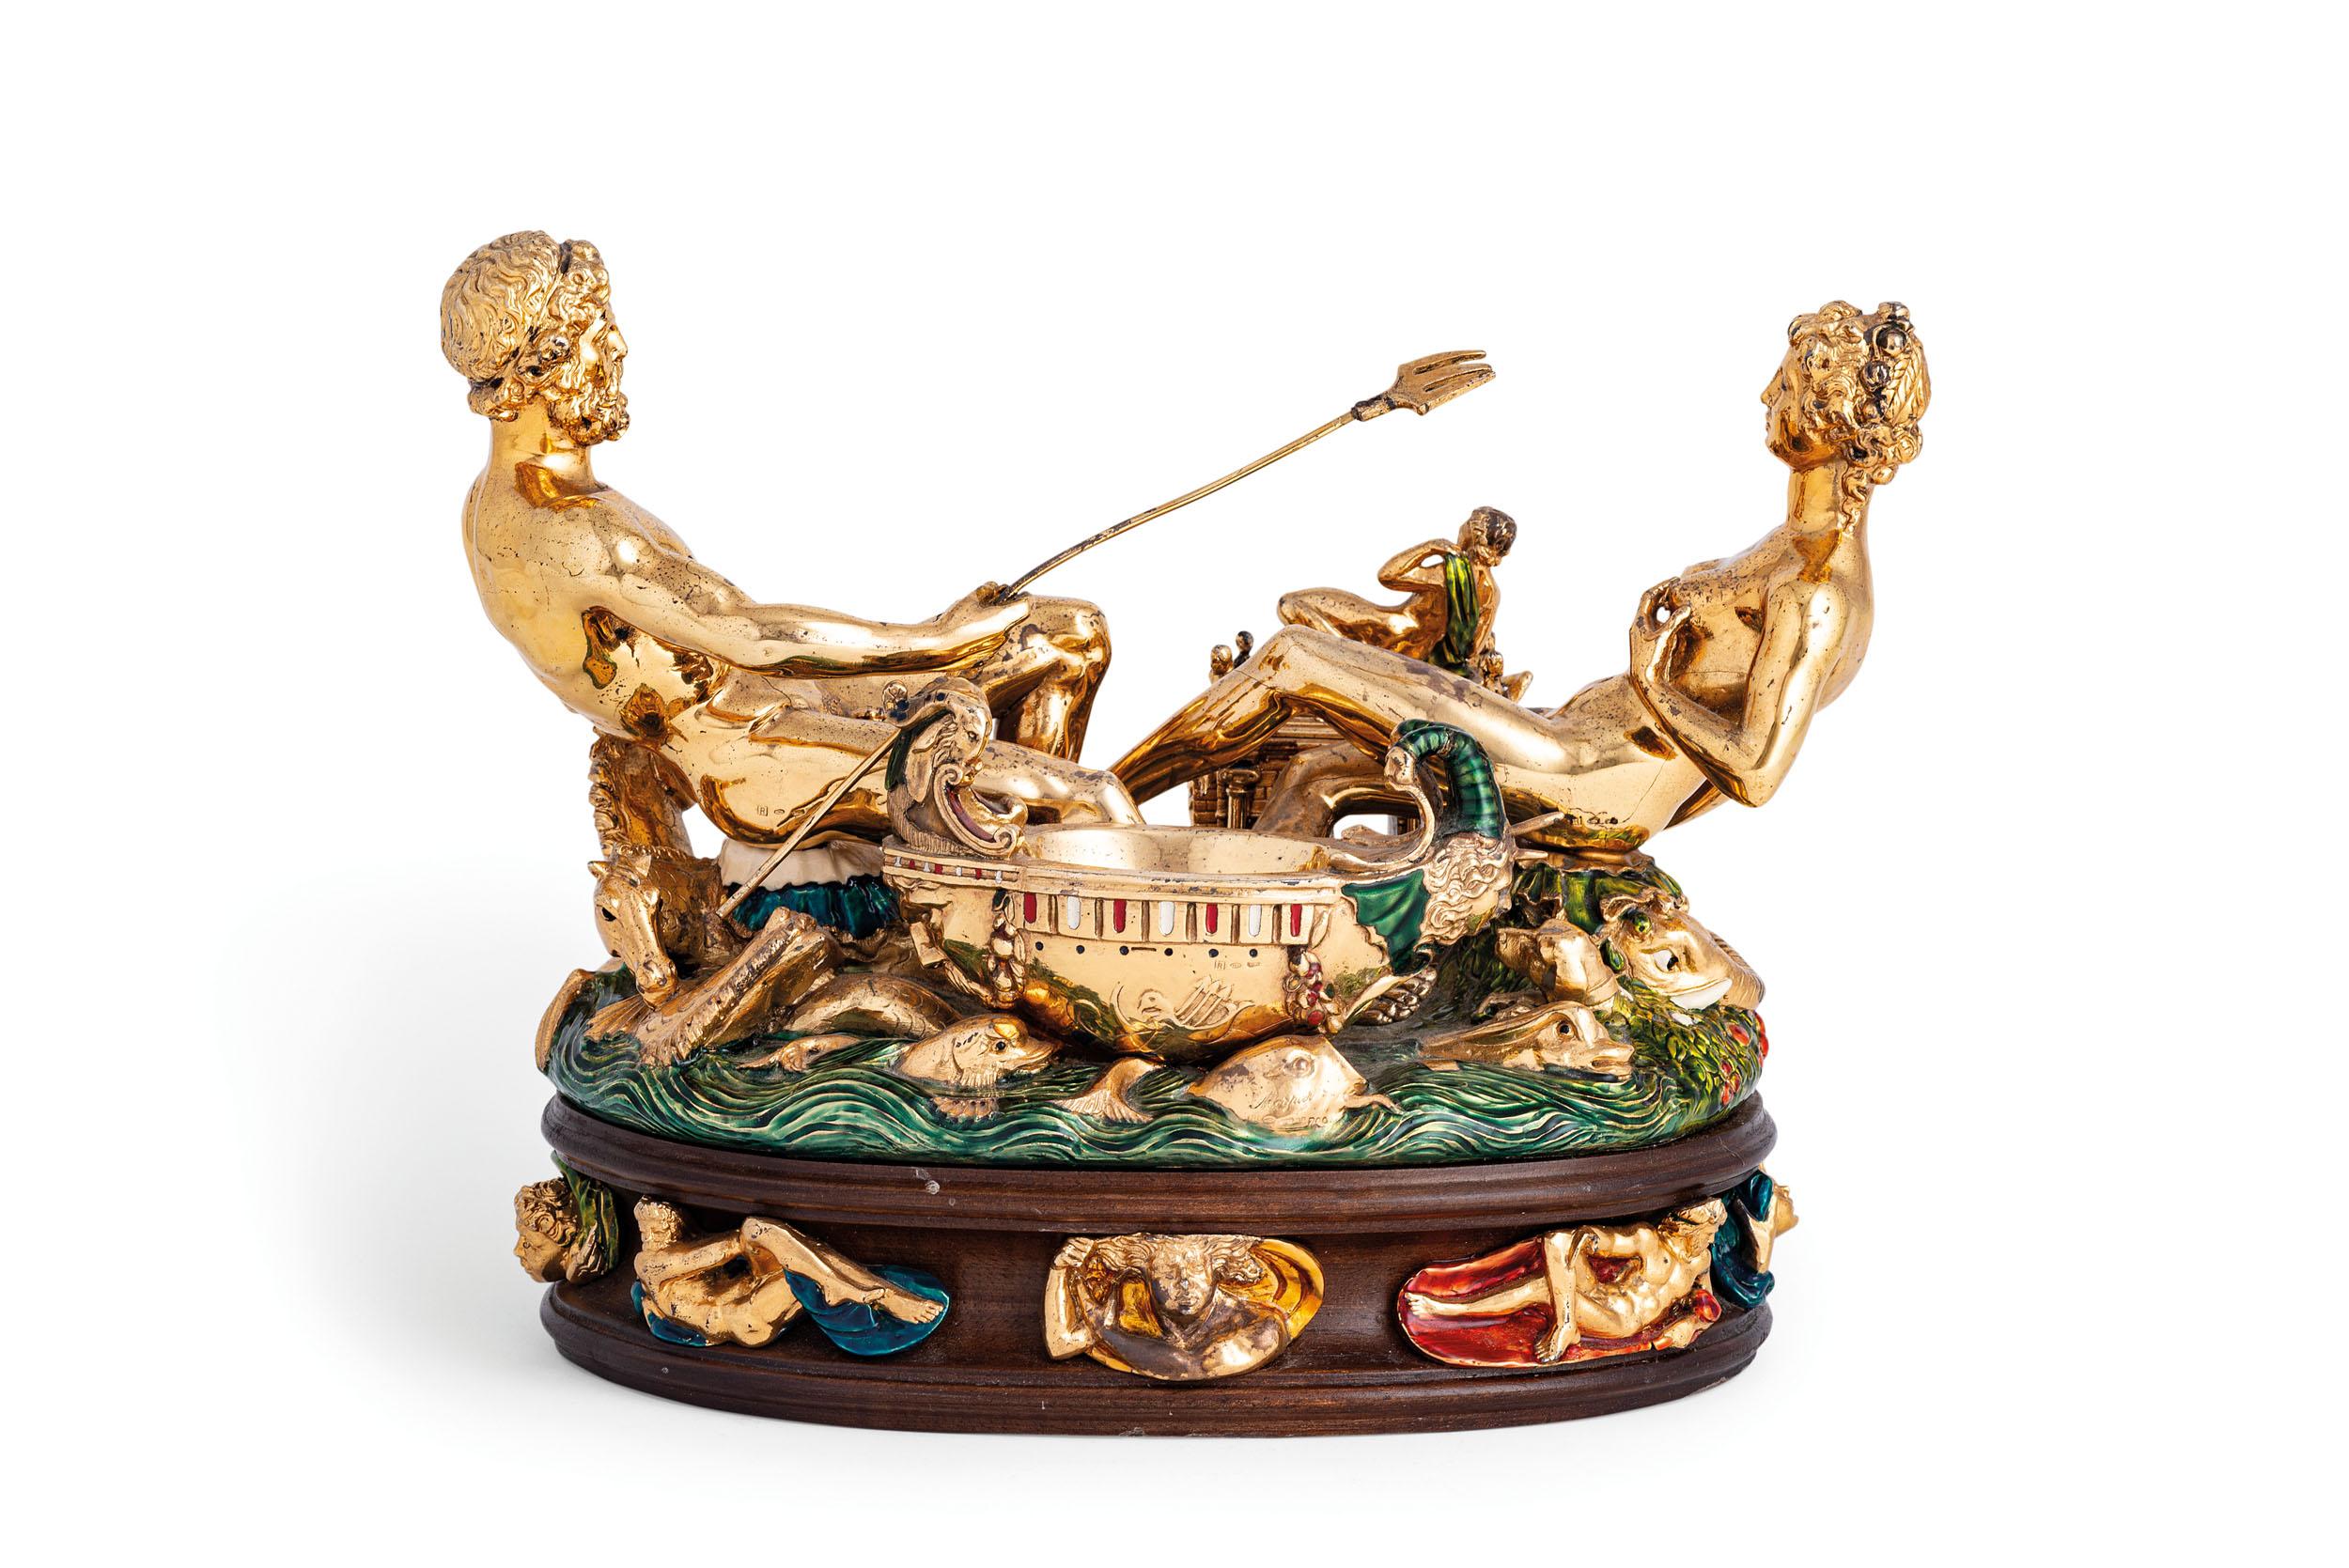 Rare replica of Benvenuto Cellini’s Renaissance Salt Cellar for Francis I

Produced by Morpier Argenteria; after Benvenuto Cellini
Florence, Italy; 1970’s
Gilt silver, enamel, resin and wood

Approximate size:  10.6 (h) x 13.75 (w) x 8.5 (d) in.

A